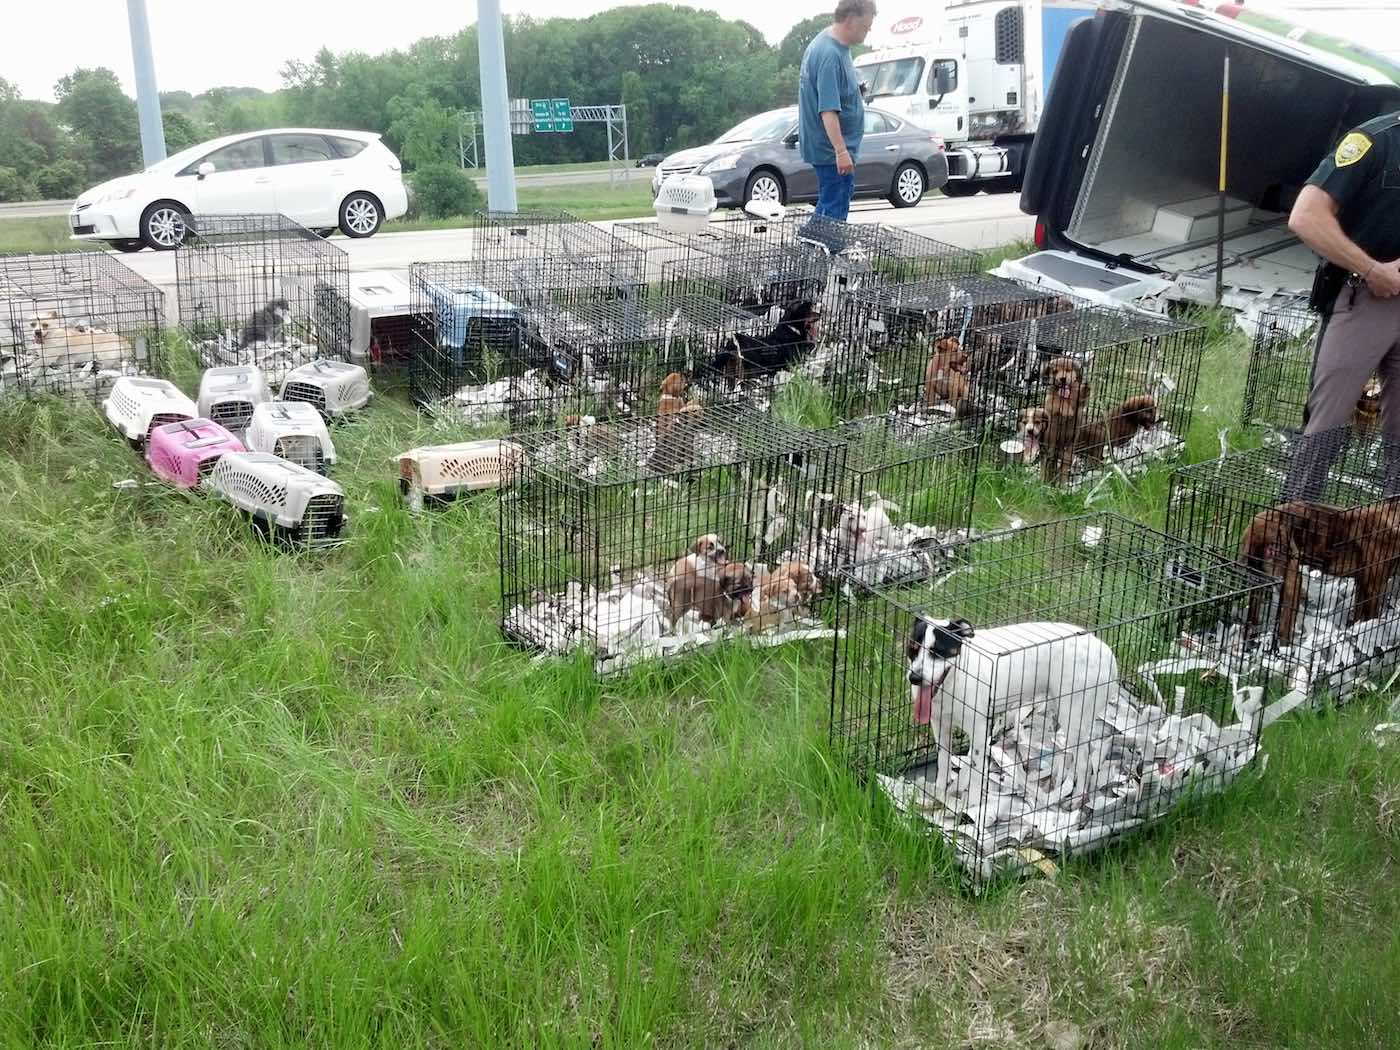 Dogs in cages by the side of the highway after a trailer overturned